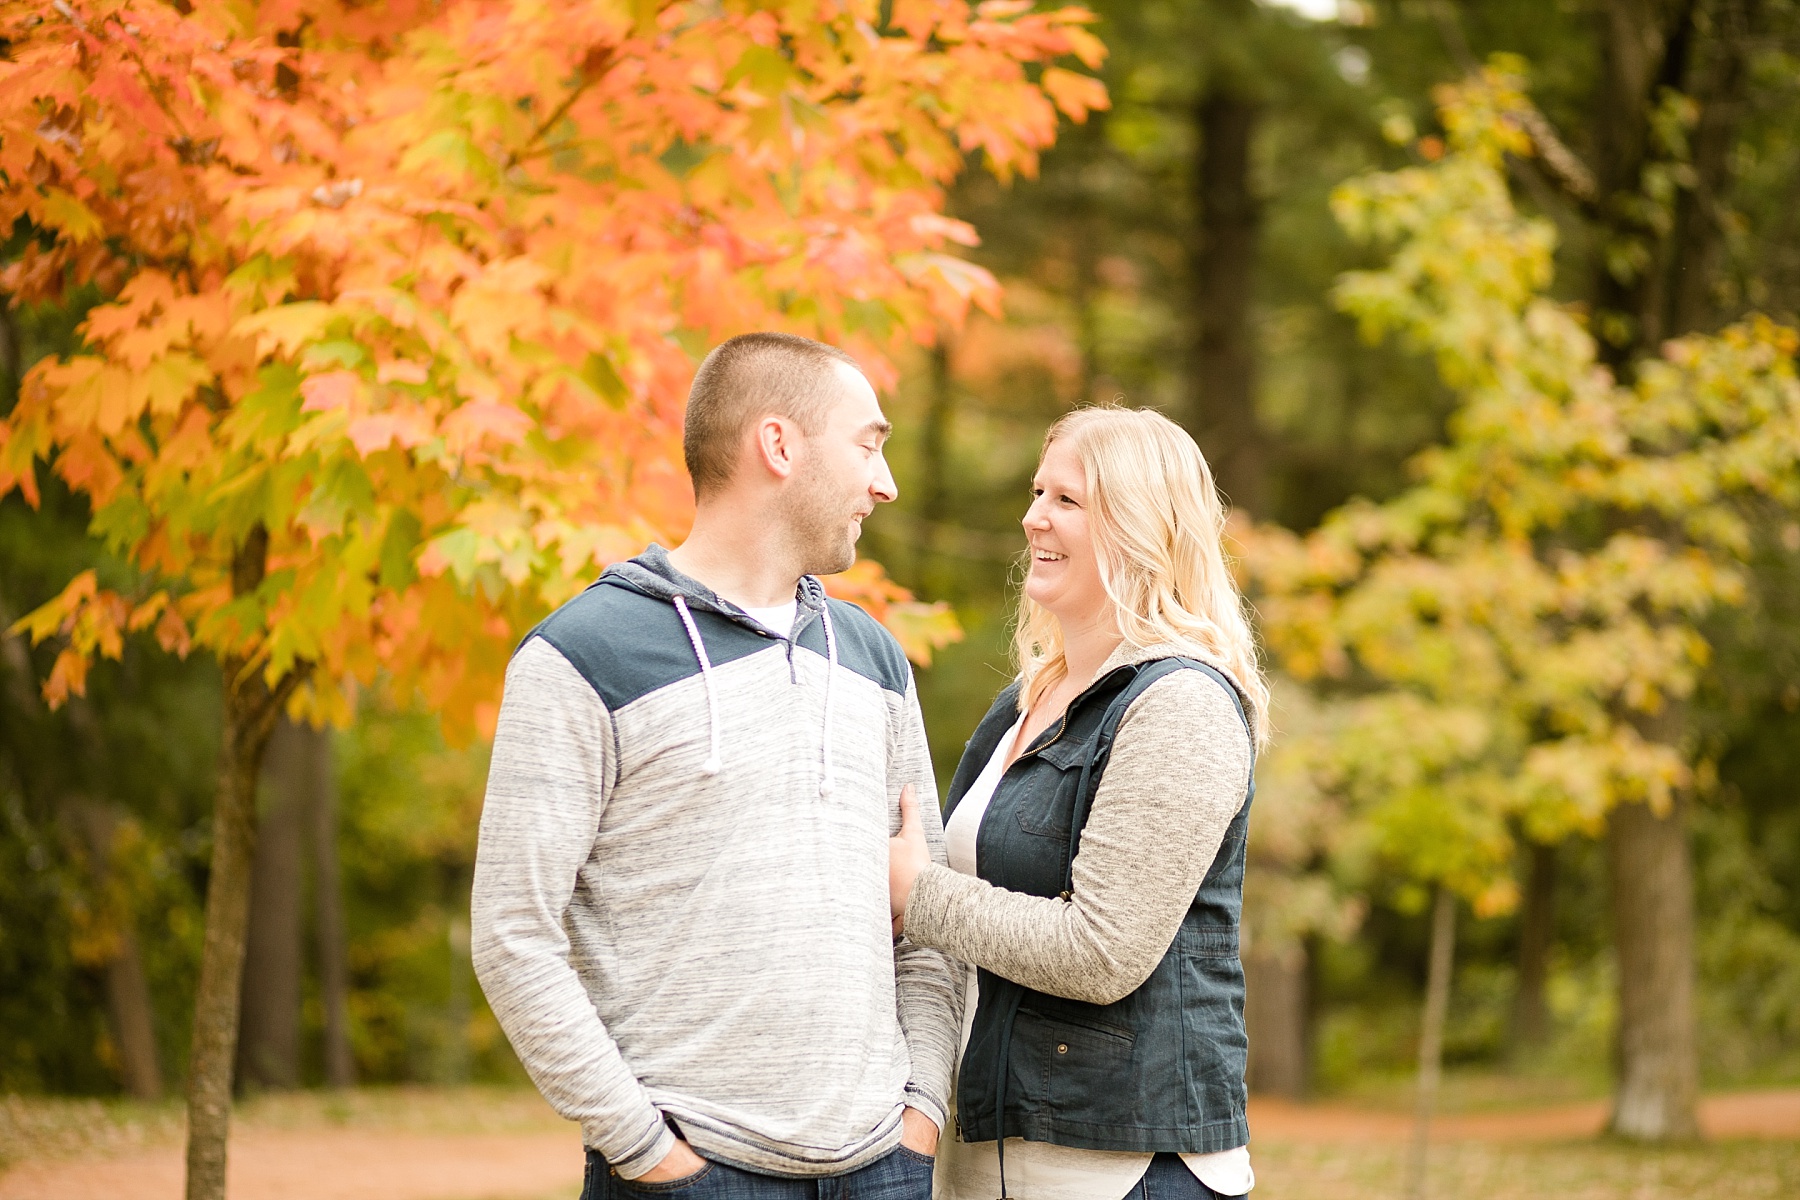 The leaves just starting to turn with vibrant colors, it was a perfect way to ease into fall with Danni & Anthony's fall engagement session in Chippewa Falls.